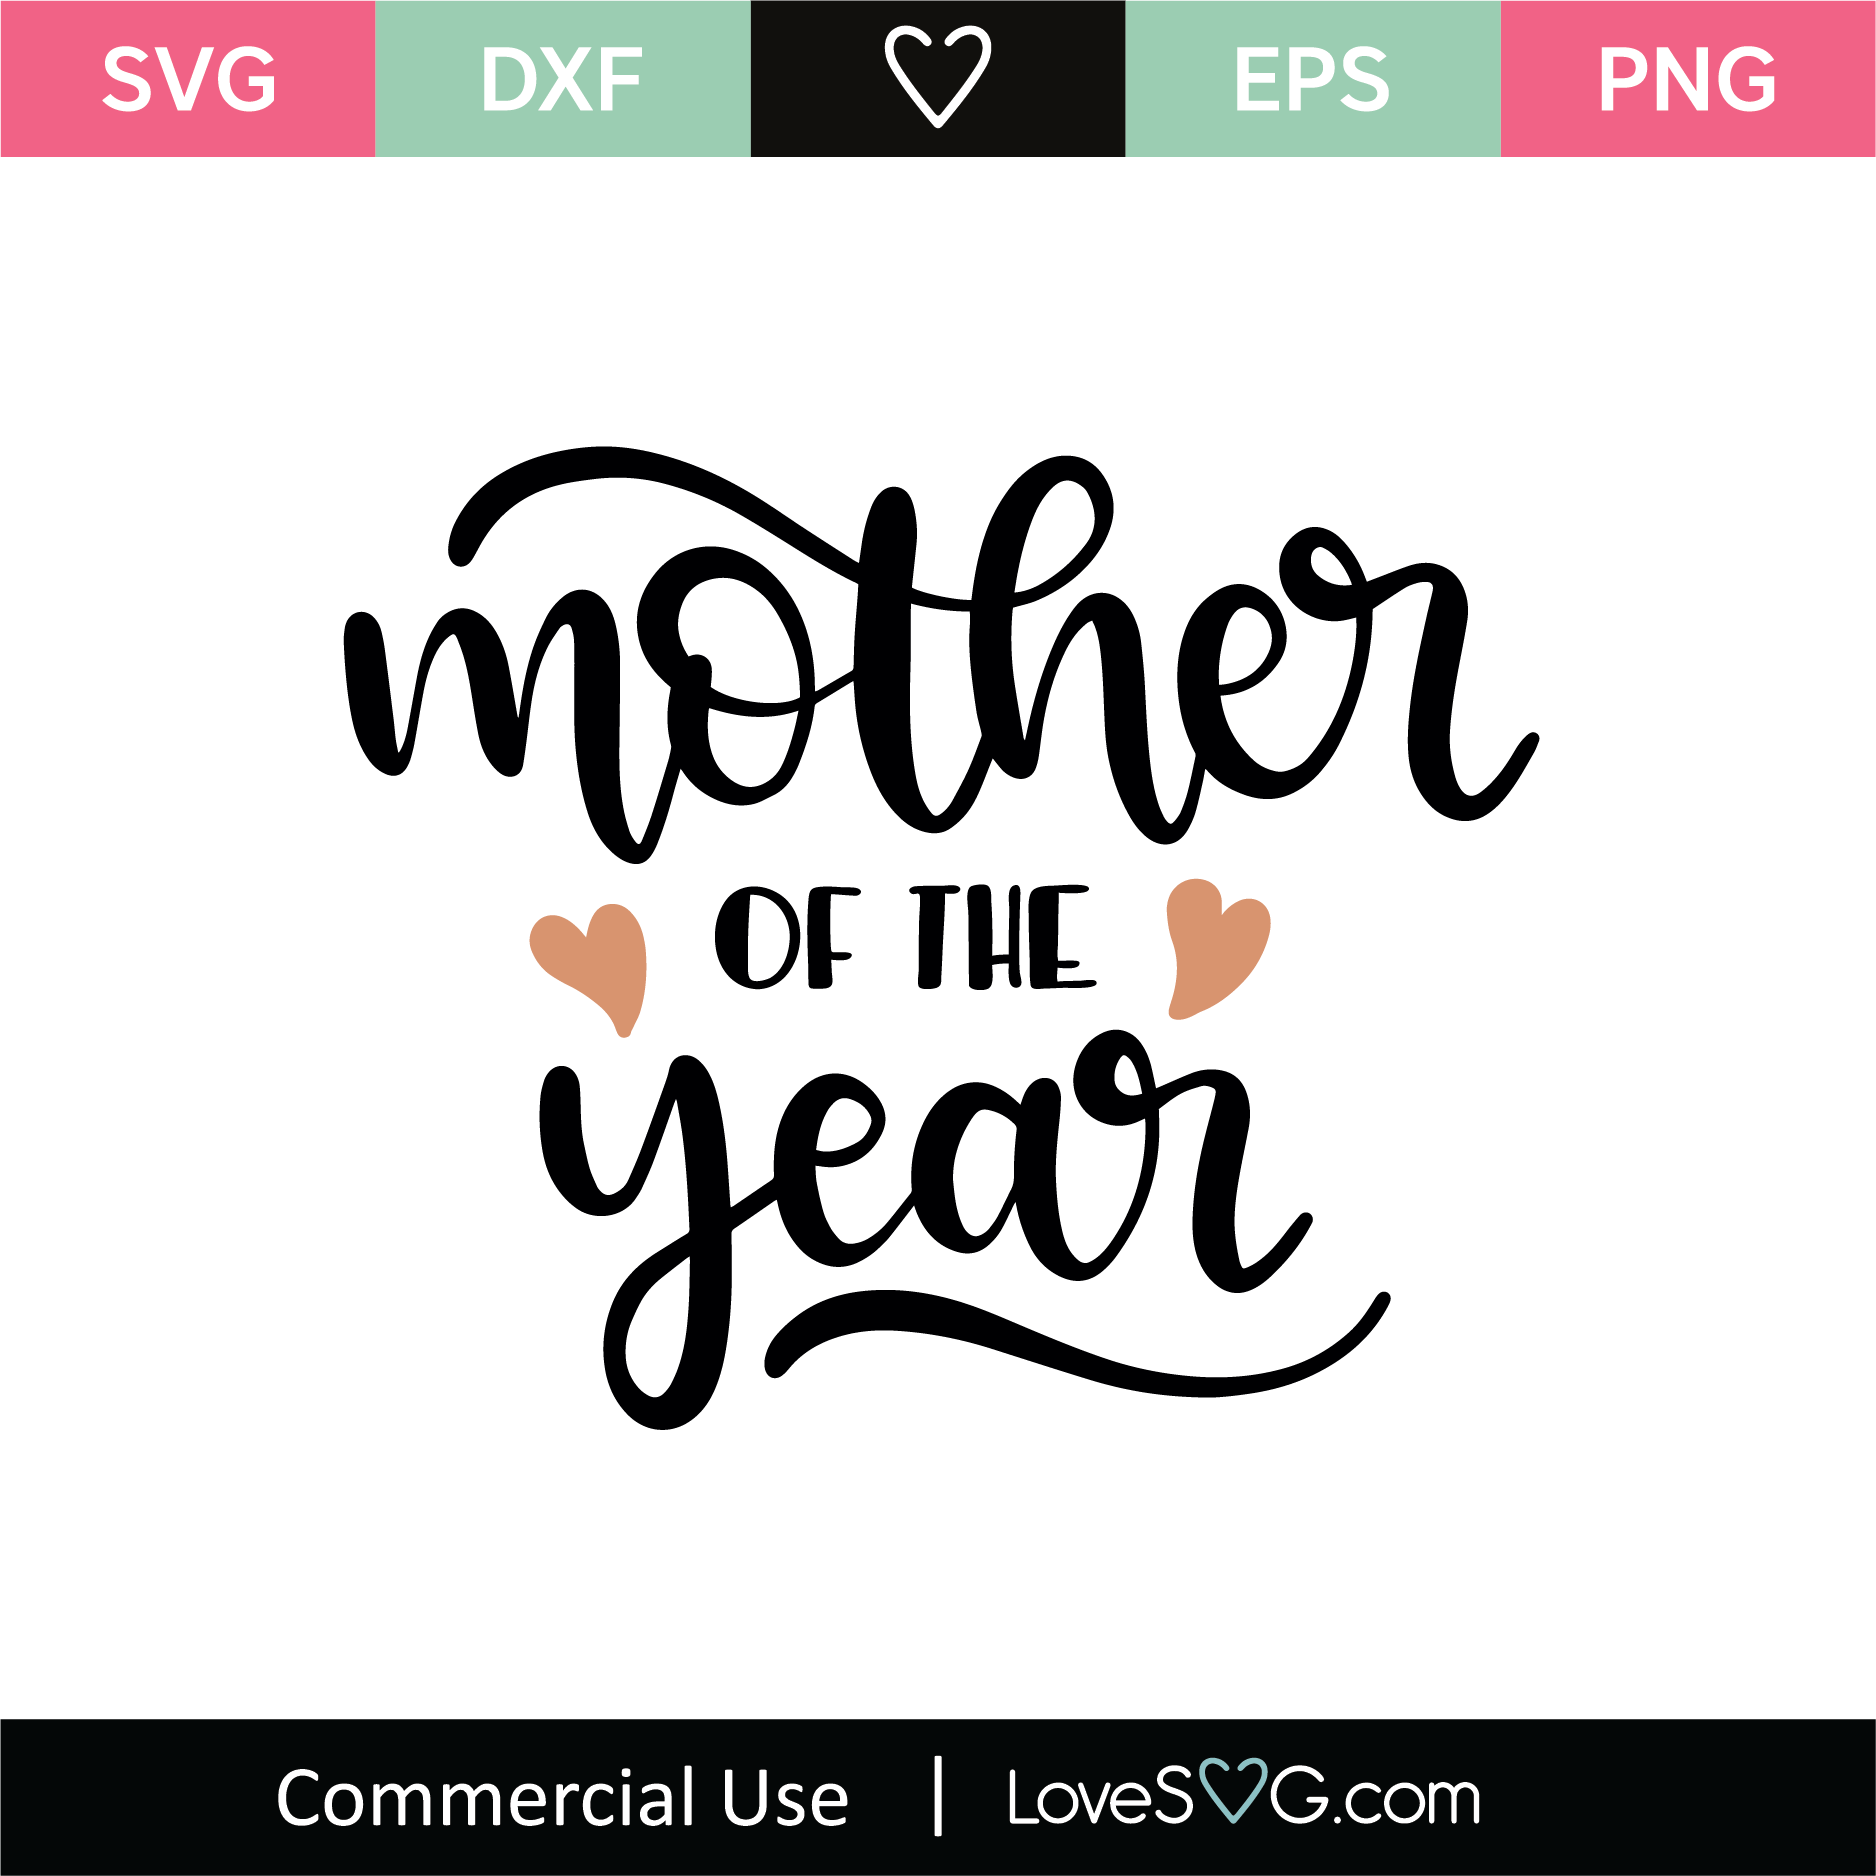 dxf Cricut jpeg vector png Mother Means Love 1 svg eps Silhouette digital file Roland Quality Cutting and/or Print File raster